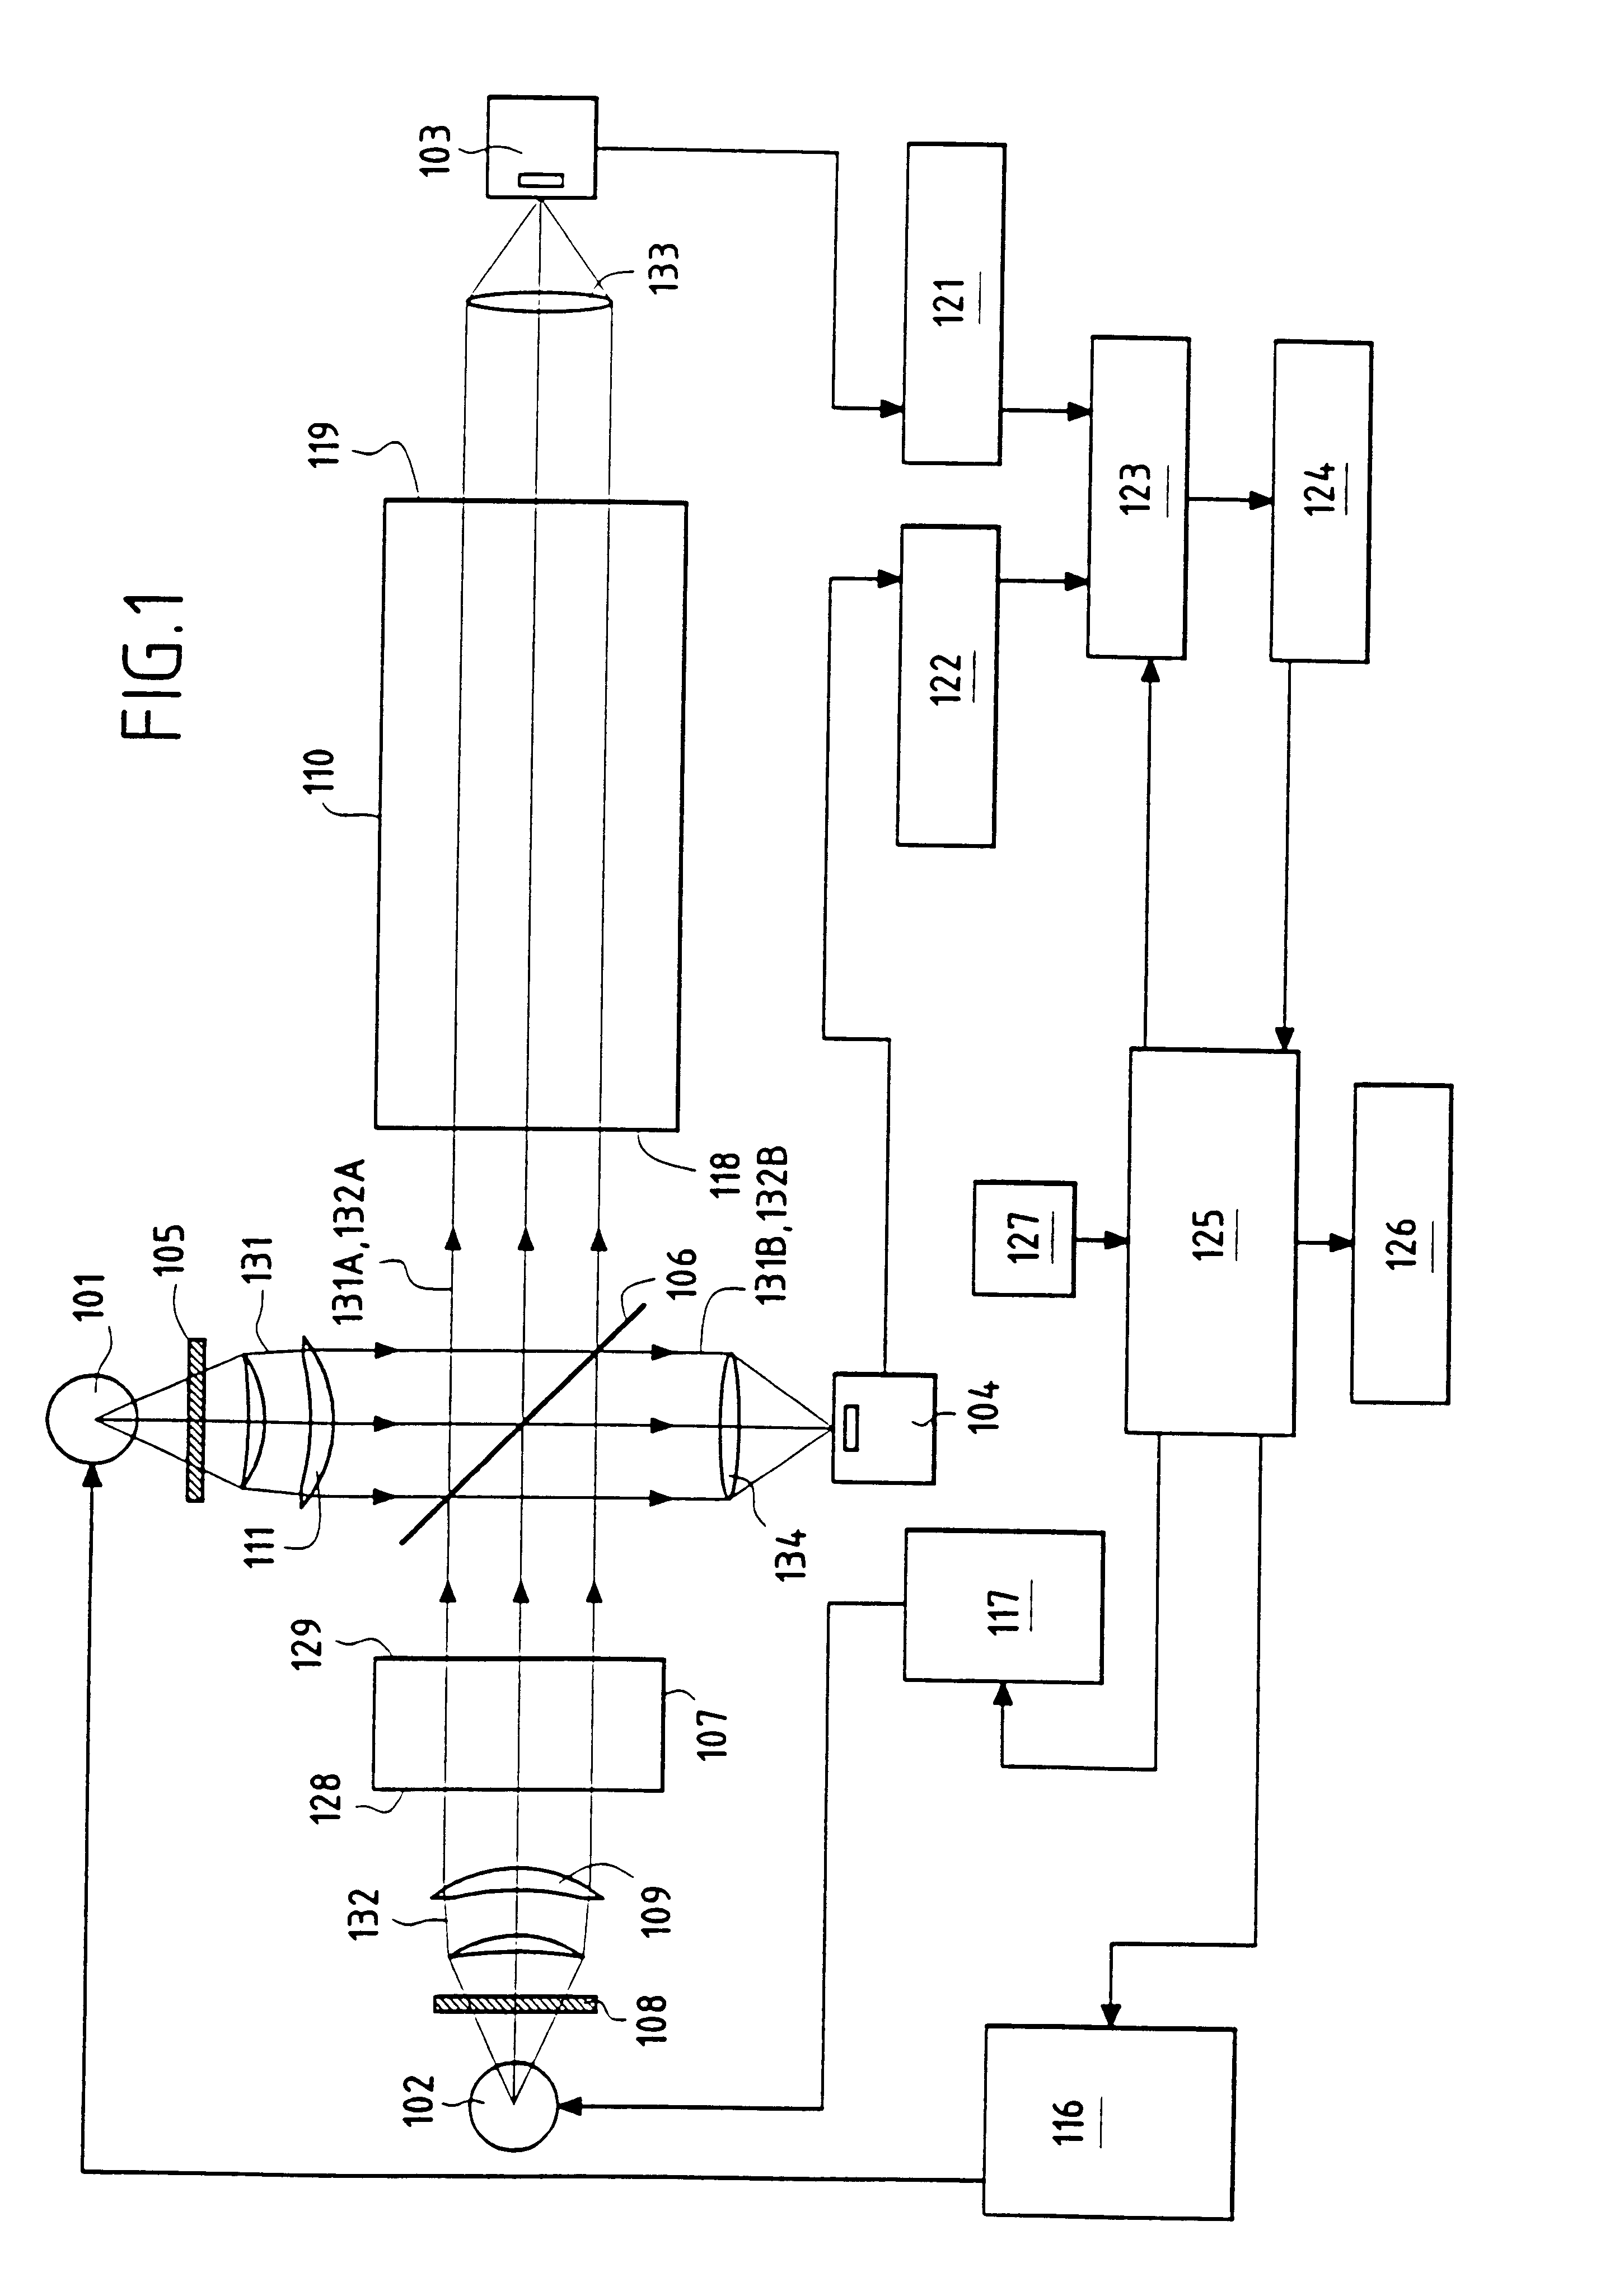 Method and apparatus for detecting gases